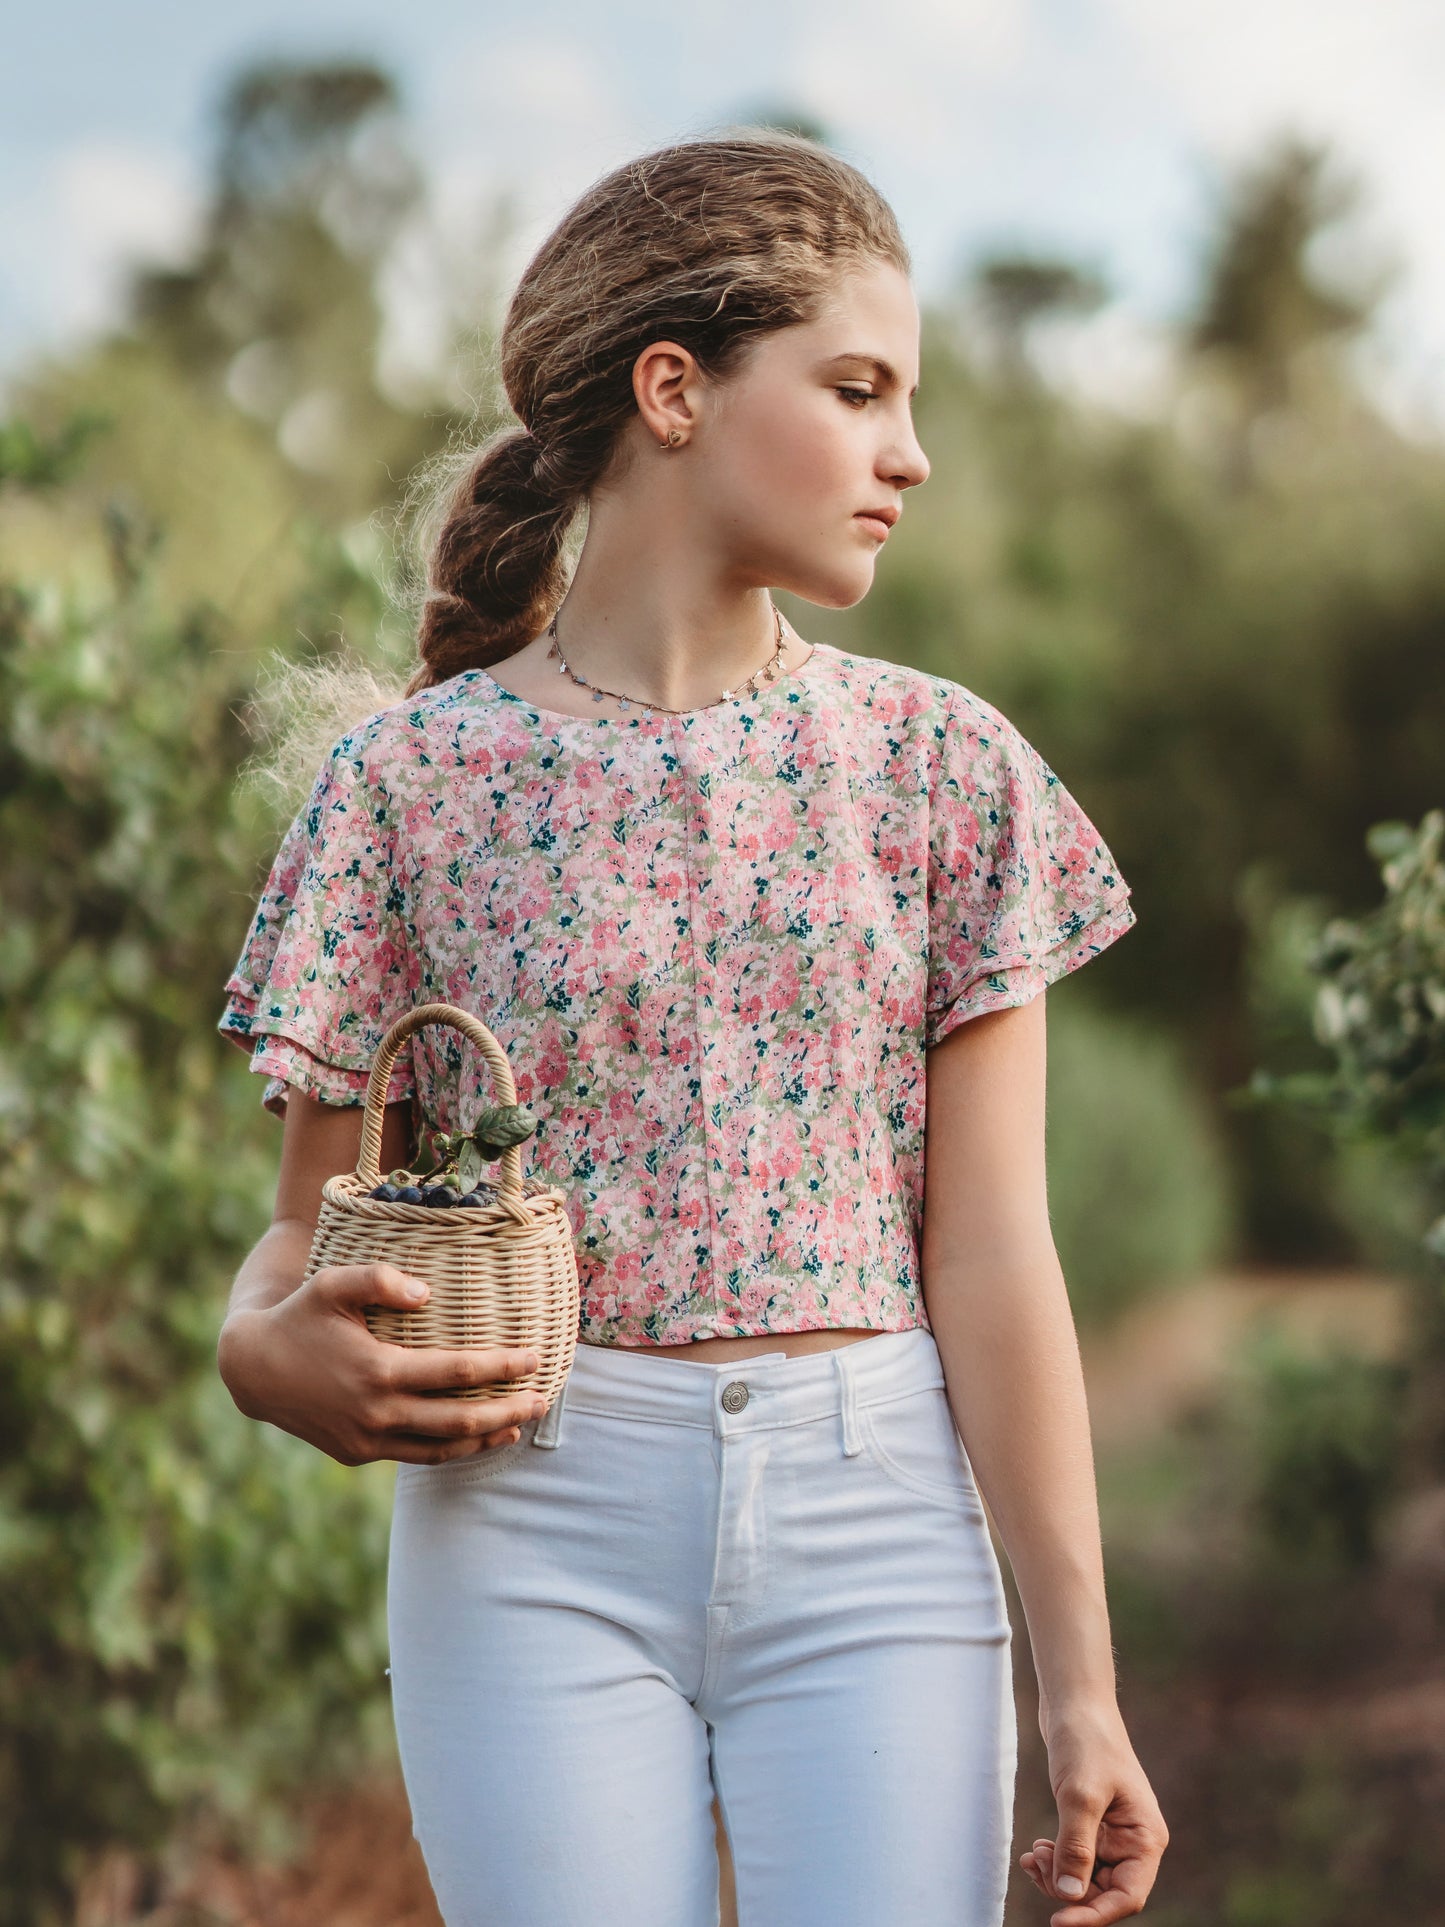 This image of a young woman features the product Classic Flutter Top - Joyful. This top has a keyhole back and flowy double ruffle sleeves. It is a pink and green floral pattern.